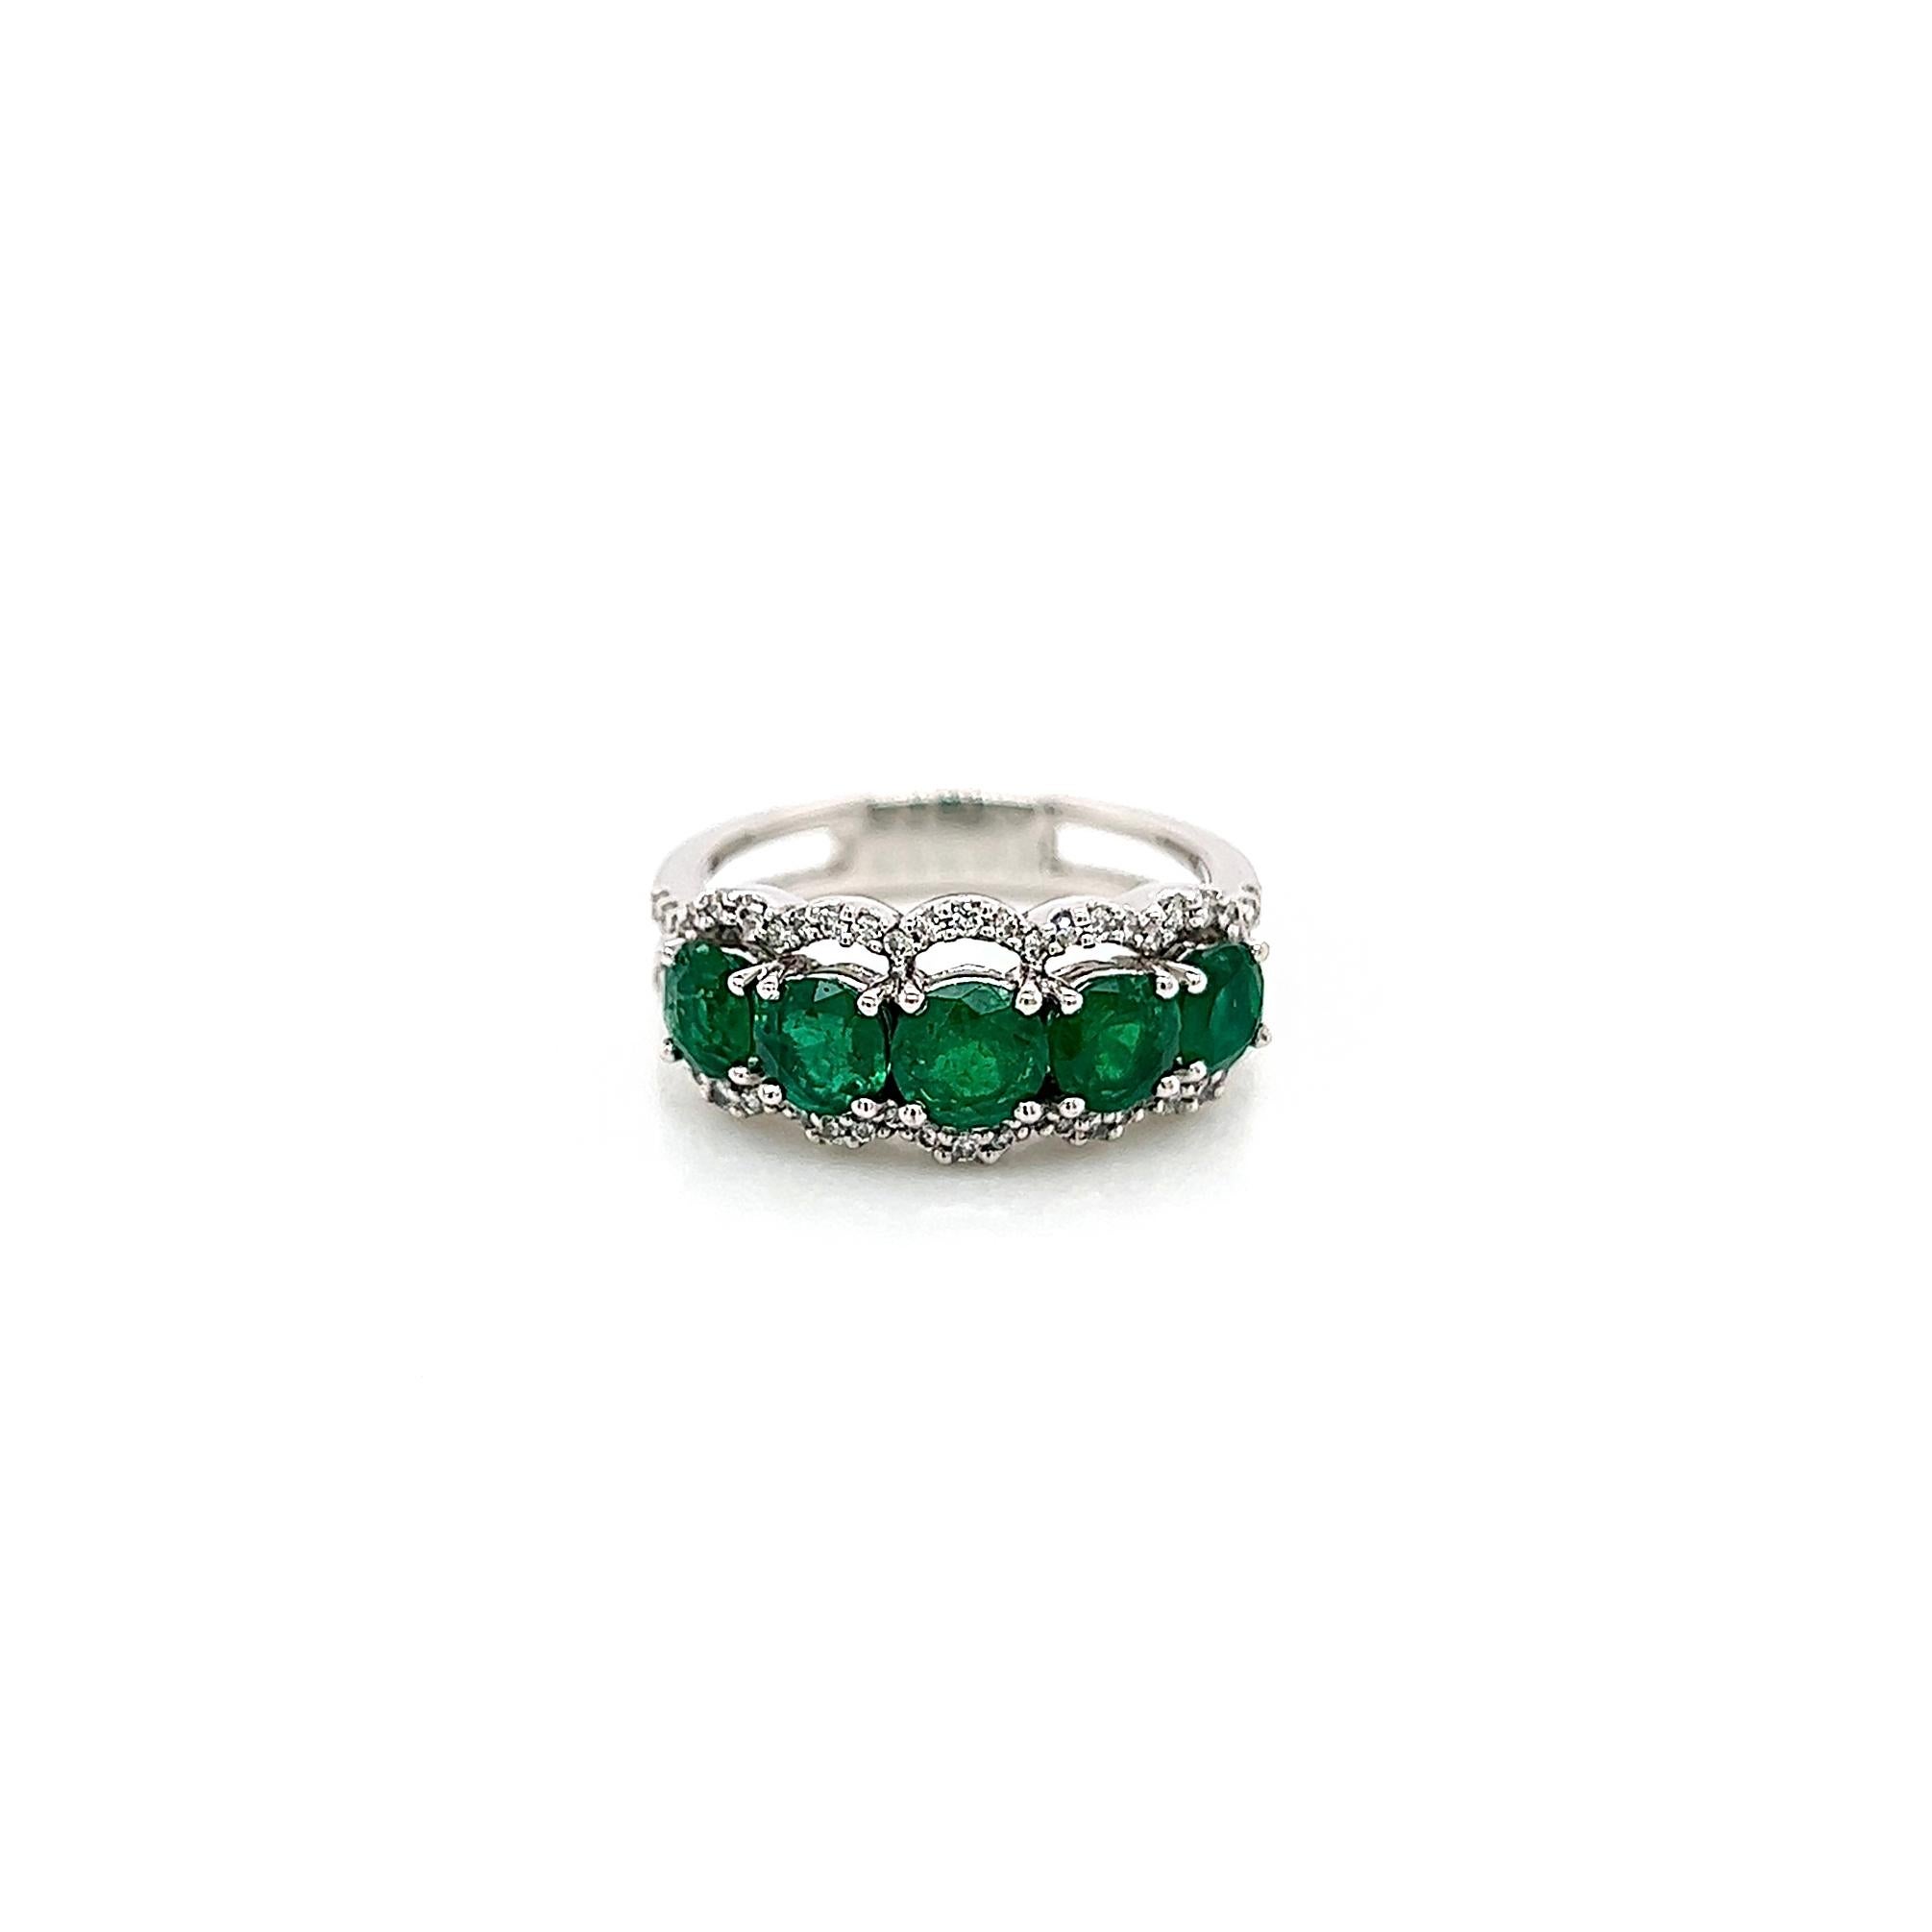 1.85Carat Green Emerald and Diamond Ladies Ring

-Metal Type: 18K White Gold
-1.57Carat Round Columbian Green Emerald
-0.28Carat Round Natural Diamonds, G-H Color, SI Clarity
-Size 6.25

Resize is available. Just contact us before ordering, the